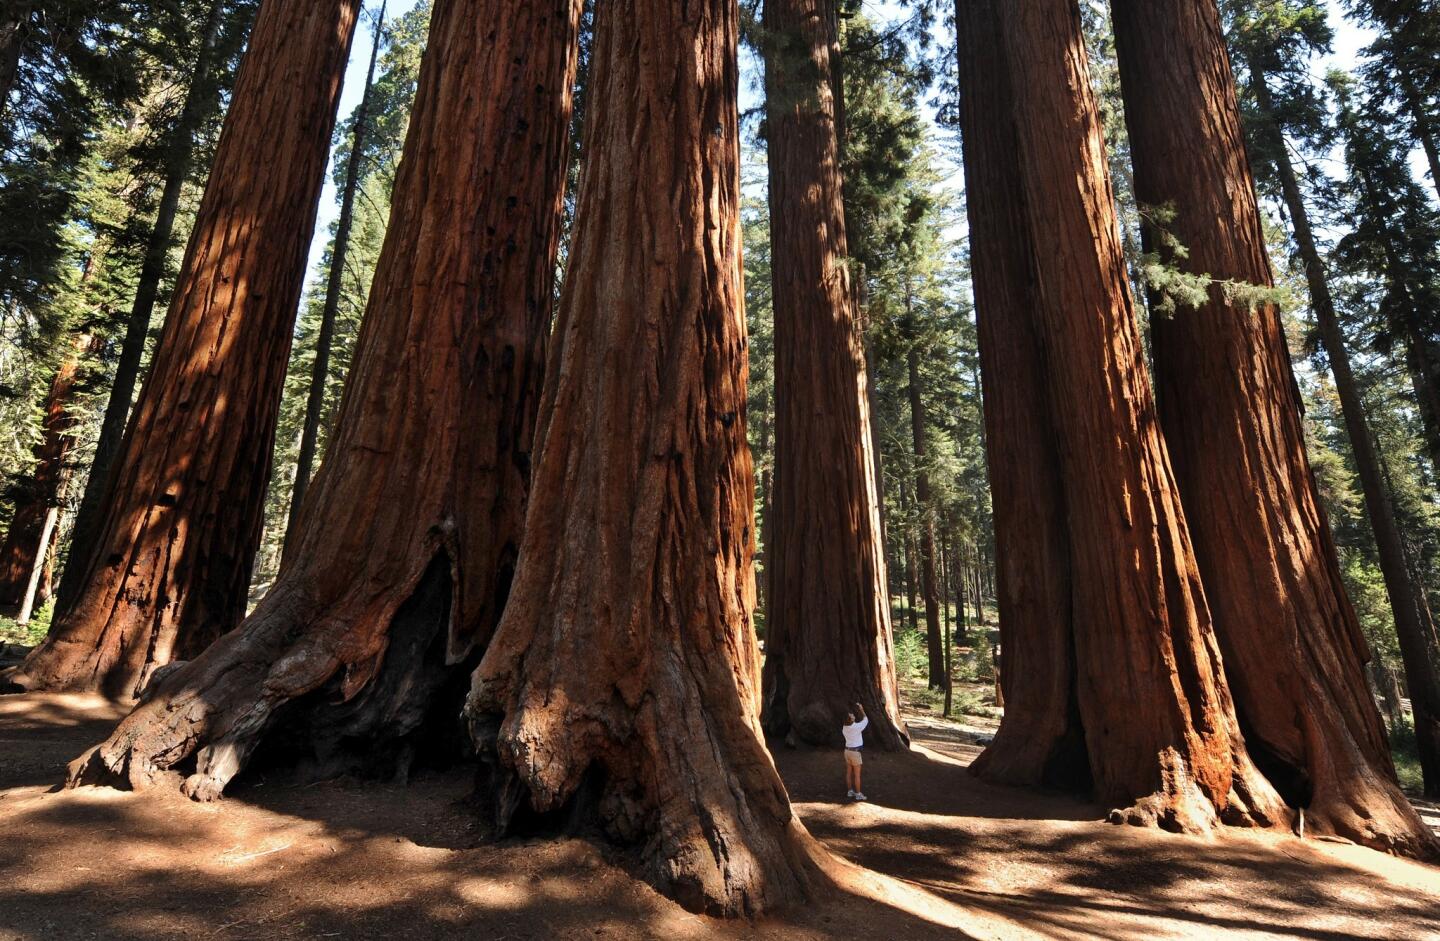 Established in 1890, Sequoia is the nation's second-oldest national park after Yellowstone. The 406,425-acre park is home to some of the world's largest trees, including the famous Gen. Sherman tree. Avoid the crowds by visiting in the spring and fall. Park traffic peaks in July and August.